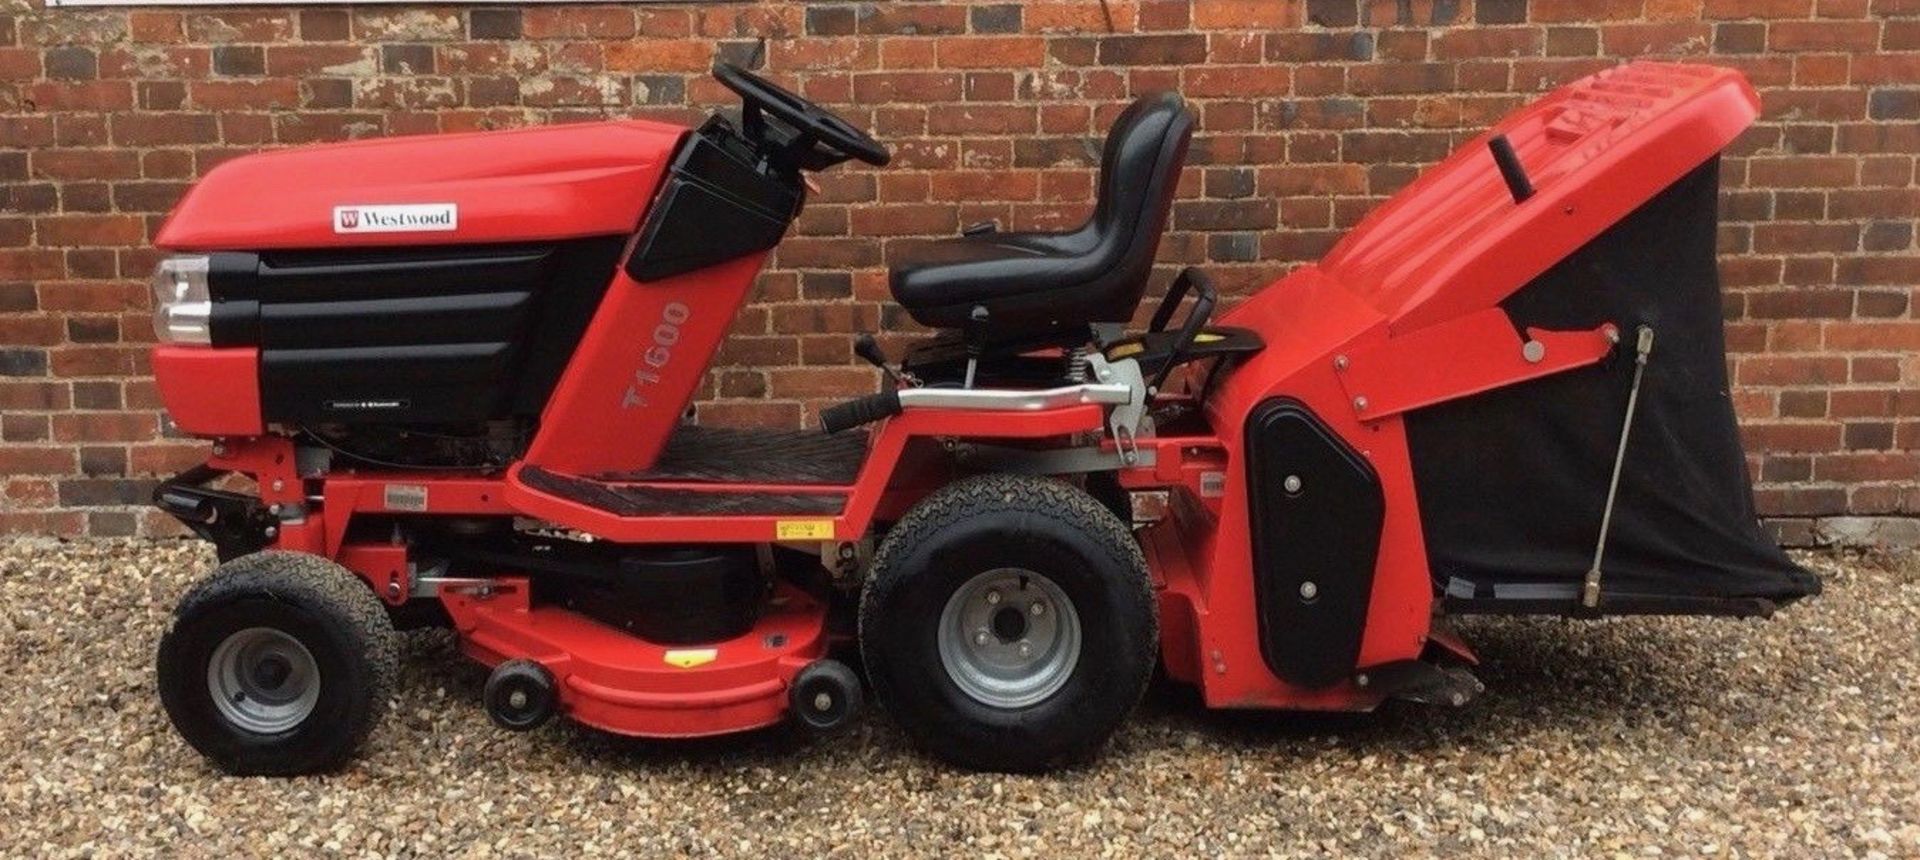 Westwood T1600H Ride On Mower 16 Hp Kawasaki Sit On Lawn Compact Tractor - Bild 2 aus 10